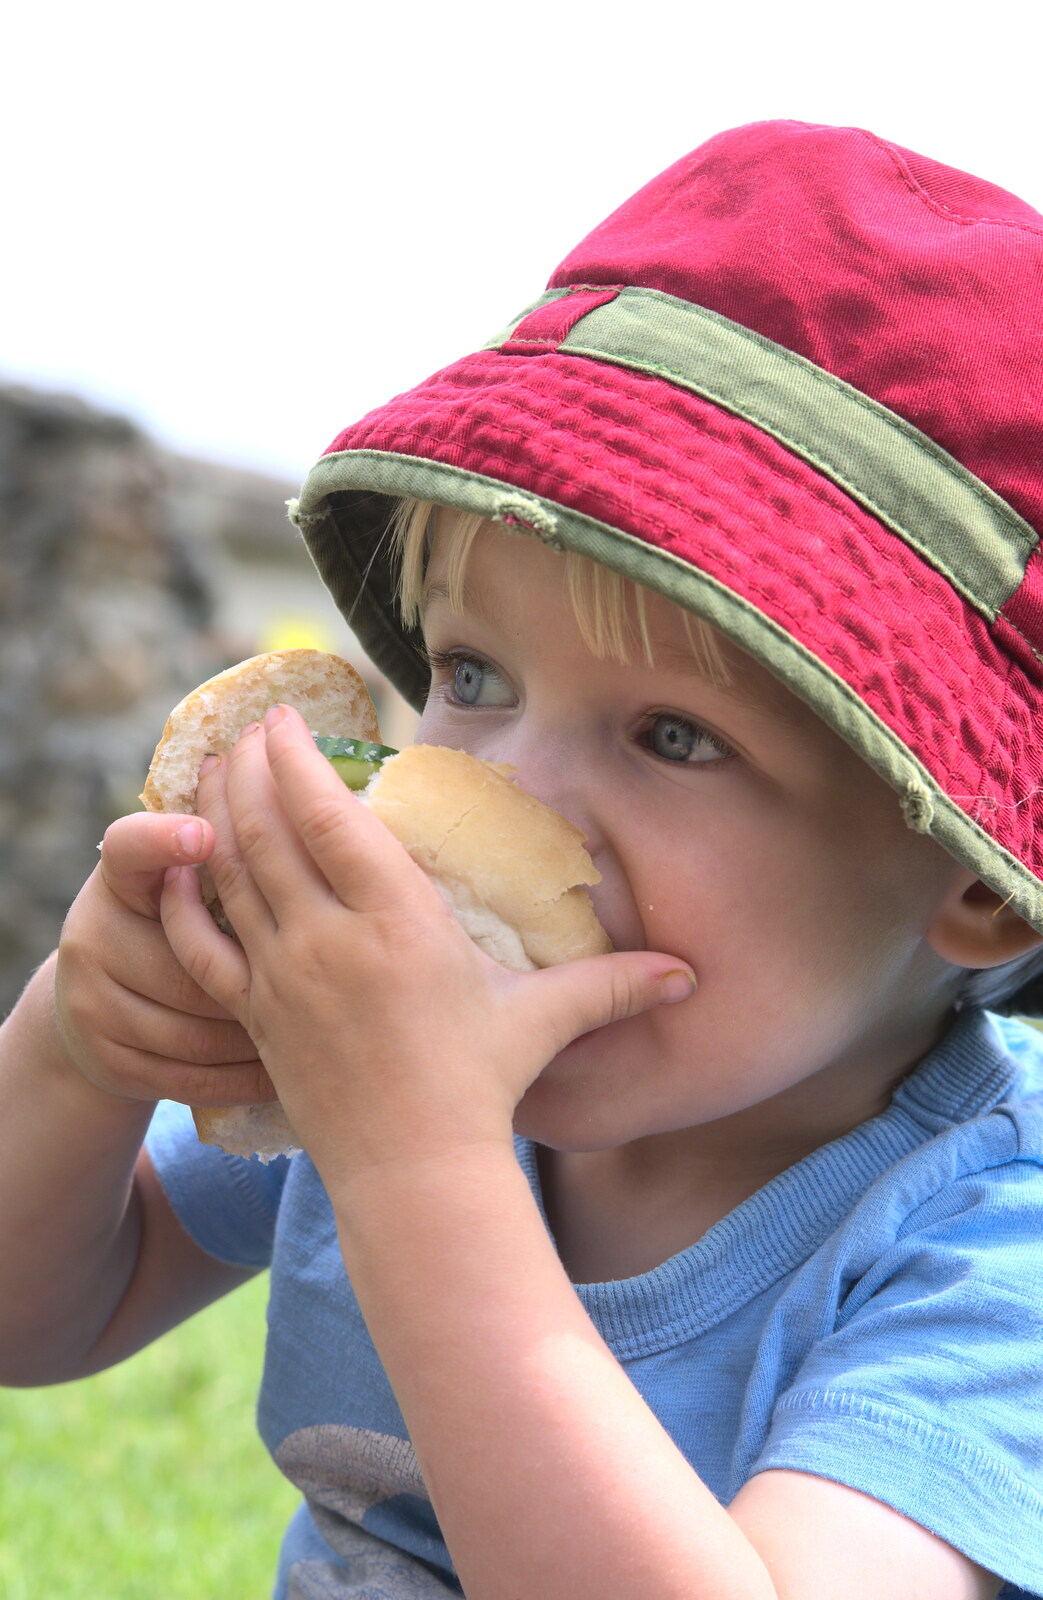 A Birthday Trip to the Zoo, Banham, Norfolk - 26th May 2014: Harry stuffs a sandwich in to his face